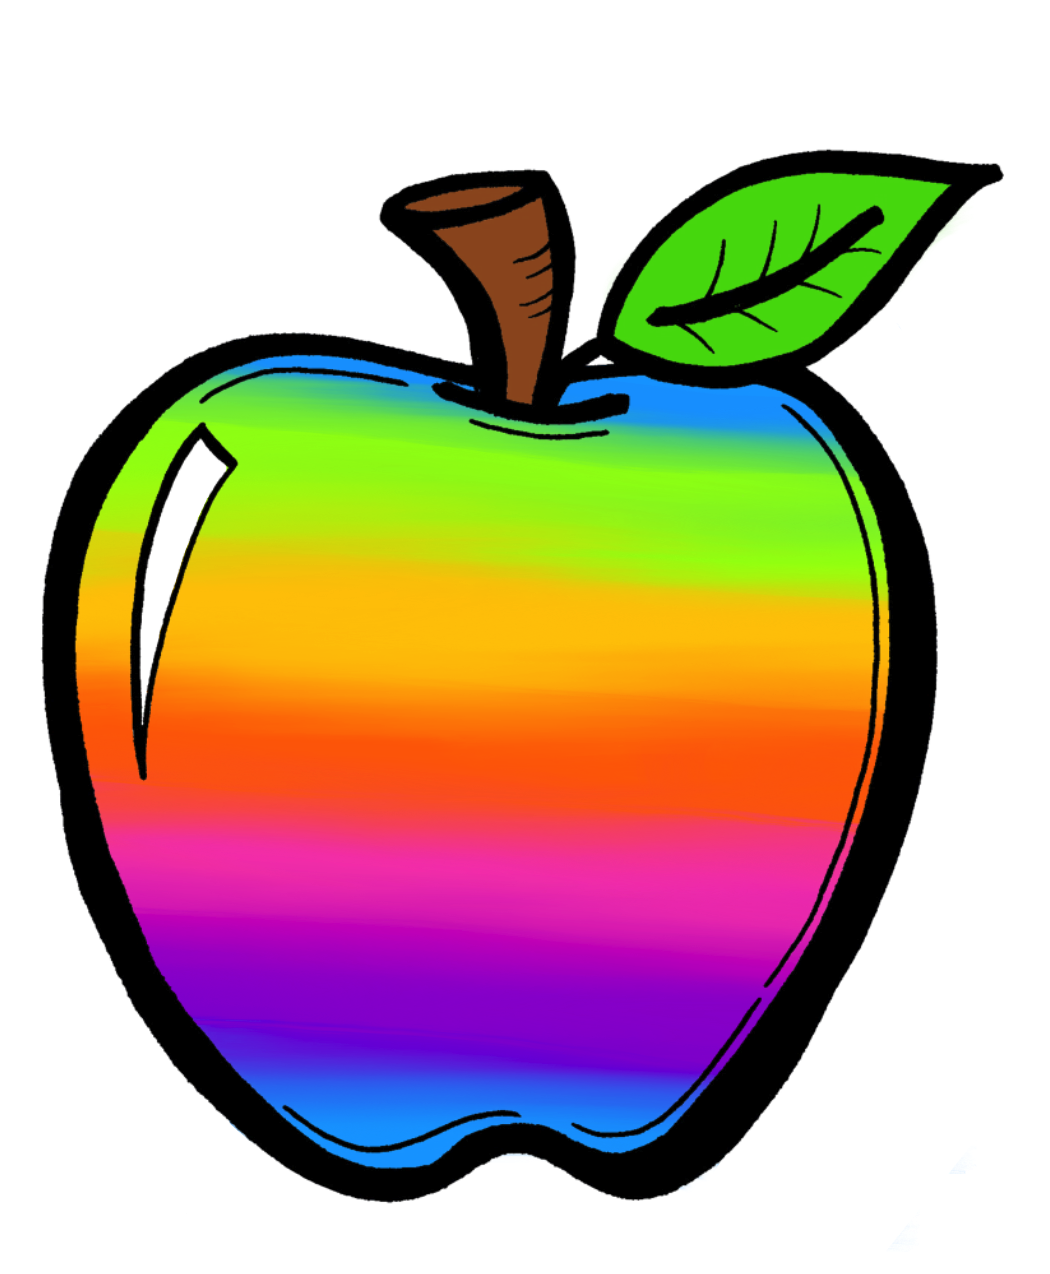 Apple Computers Clipart Images & Pictures - Becuo